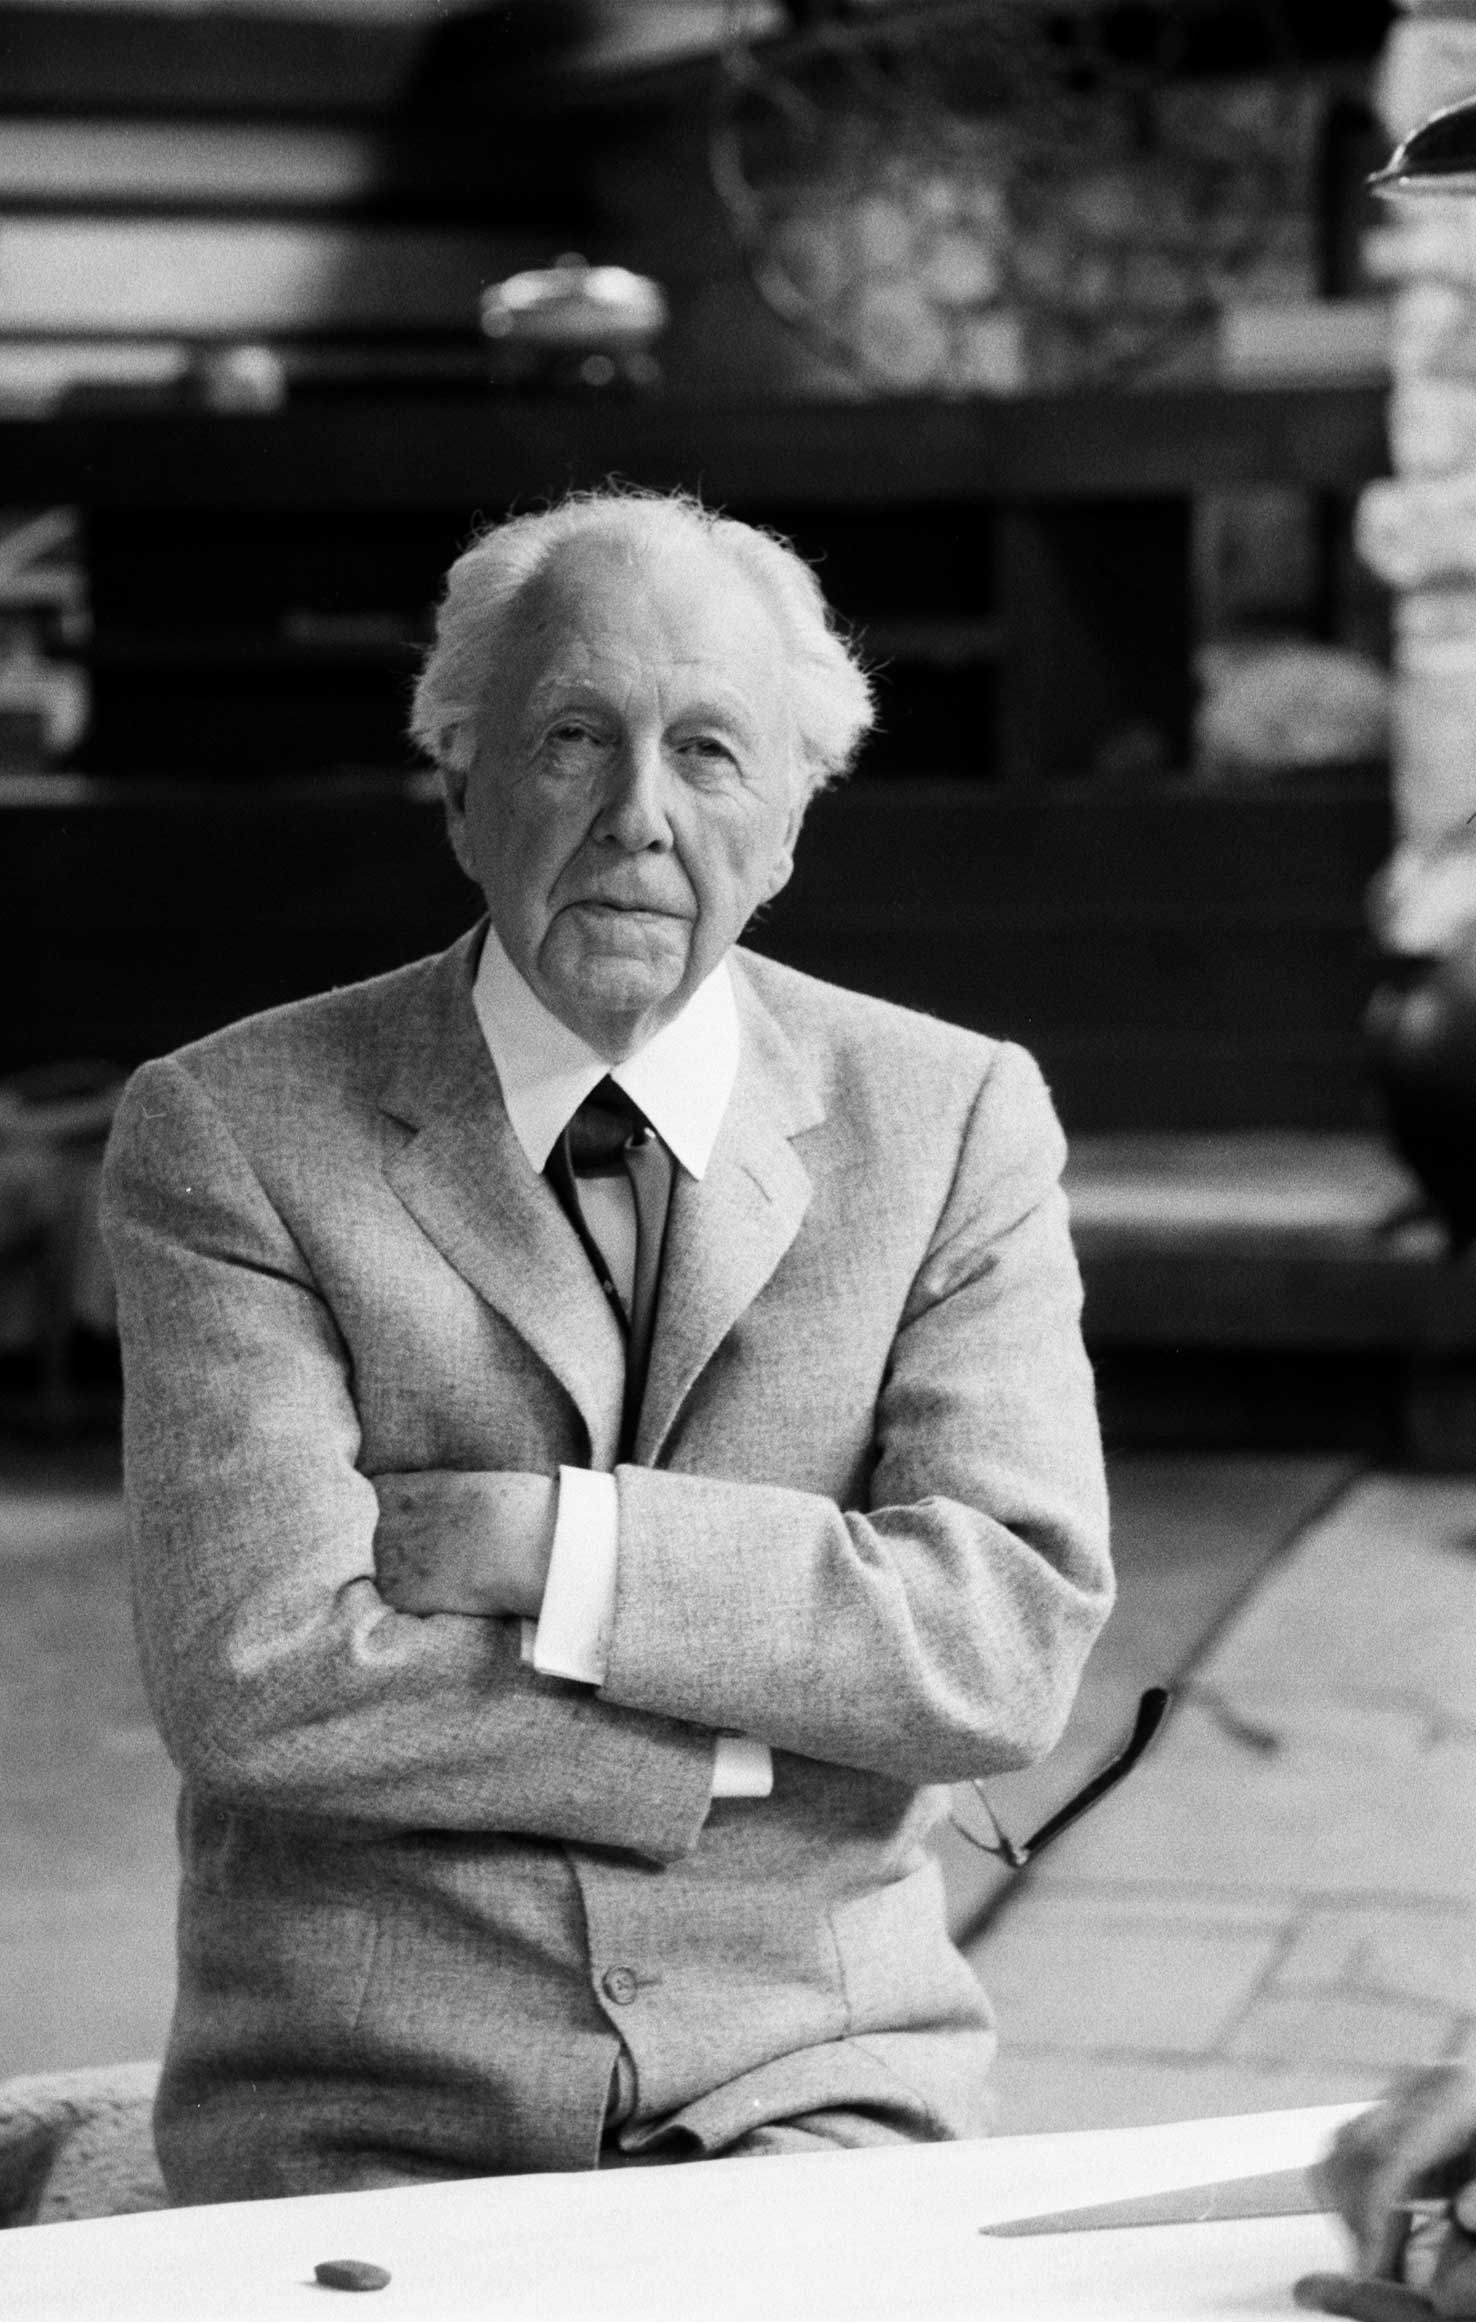 Frank Lloyd Wright 89, works 12-hour day running fellowship for aspiring architects, dances and swims, says:  The more I abused my physical resources, the more I had.